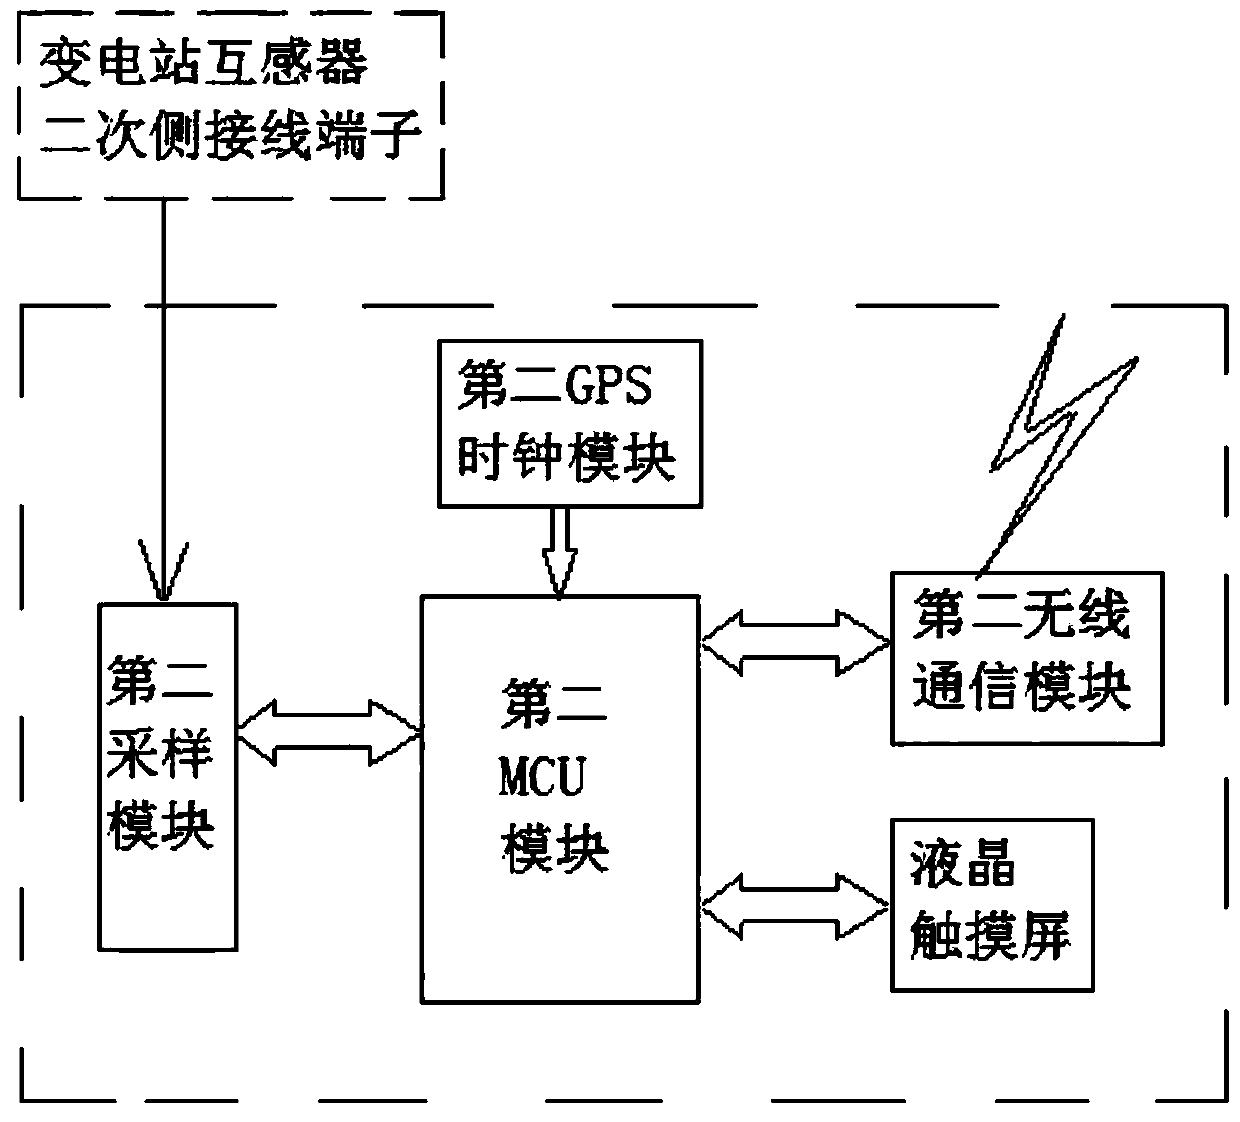 Secondary Polarity Detection Method of Substation Transformer Based on GPS Synchronous Time Service